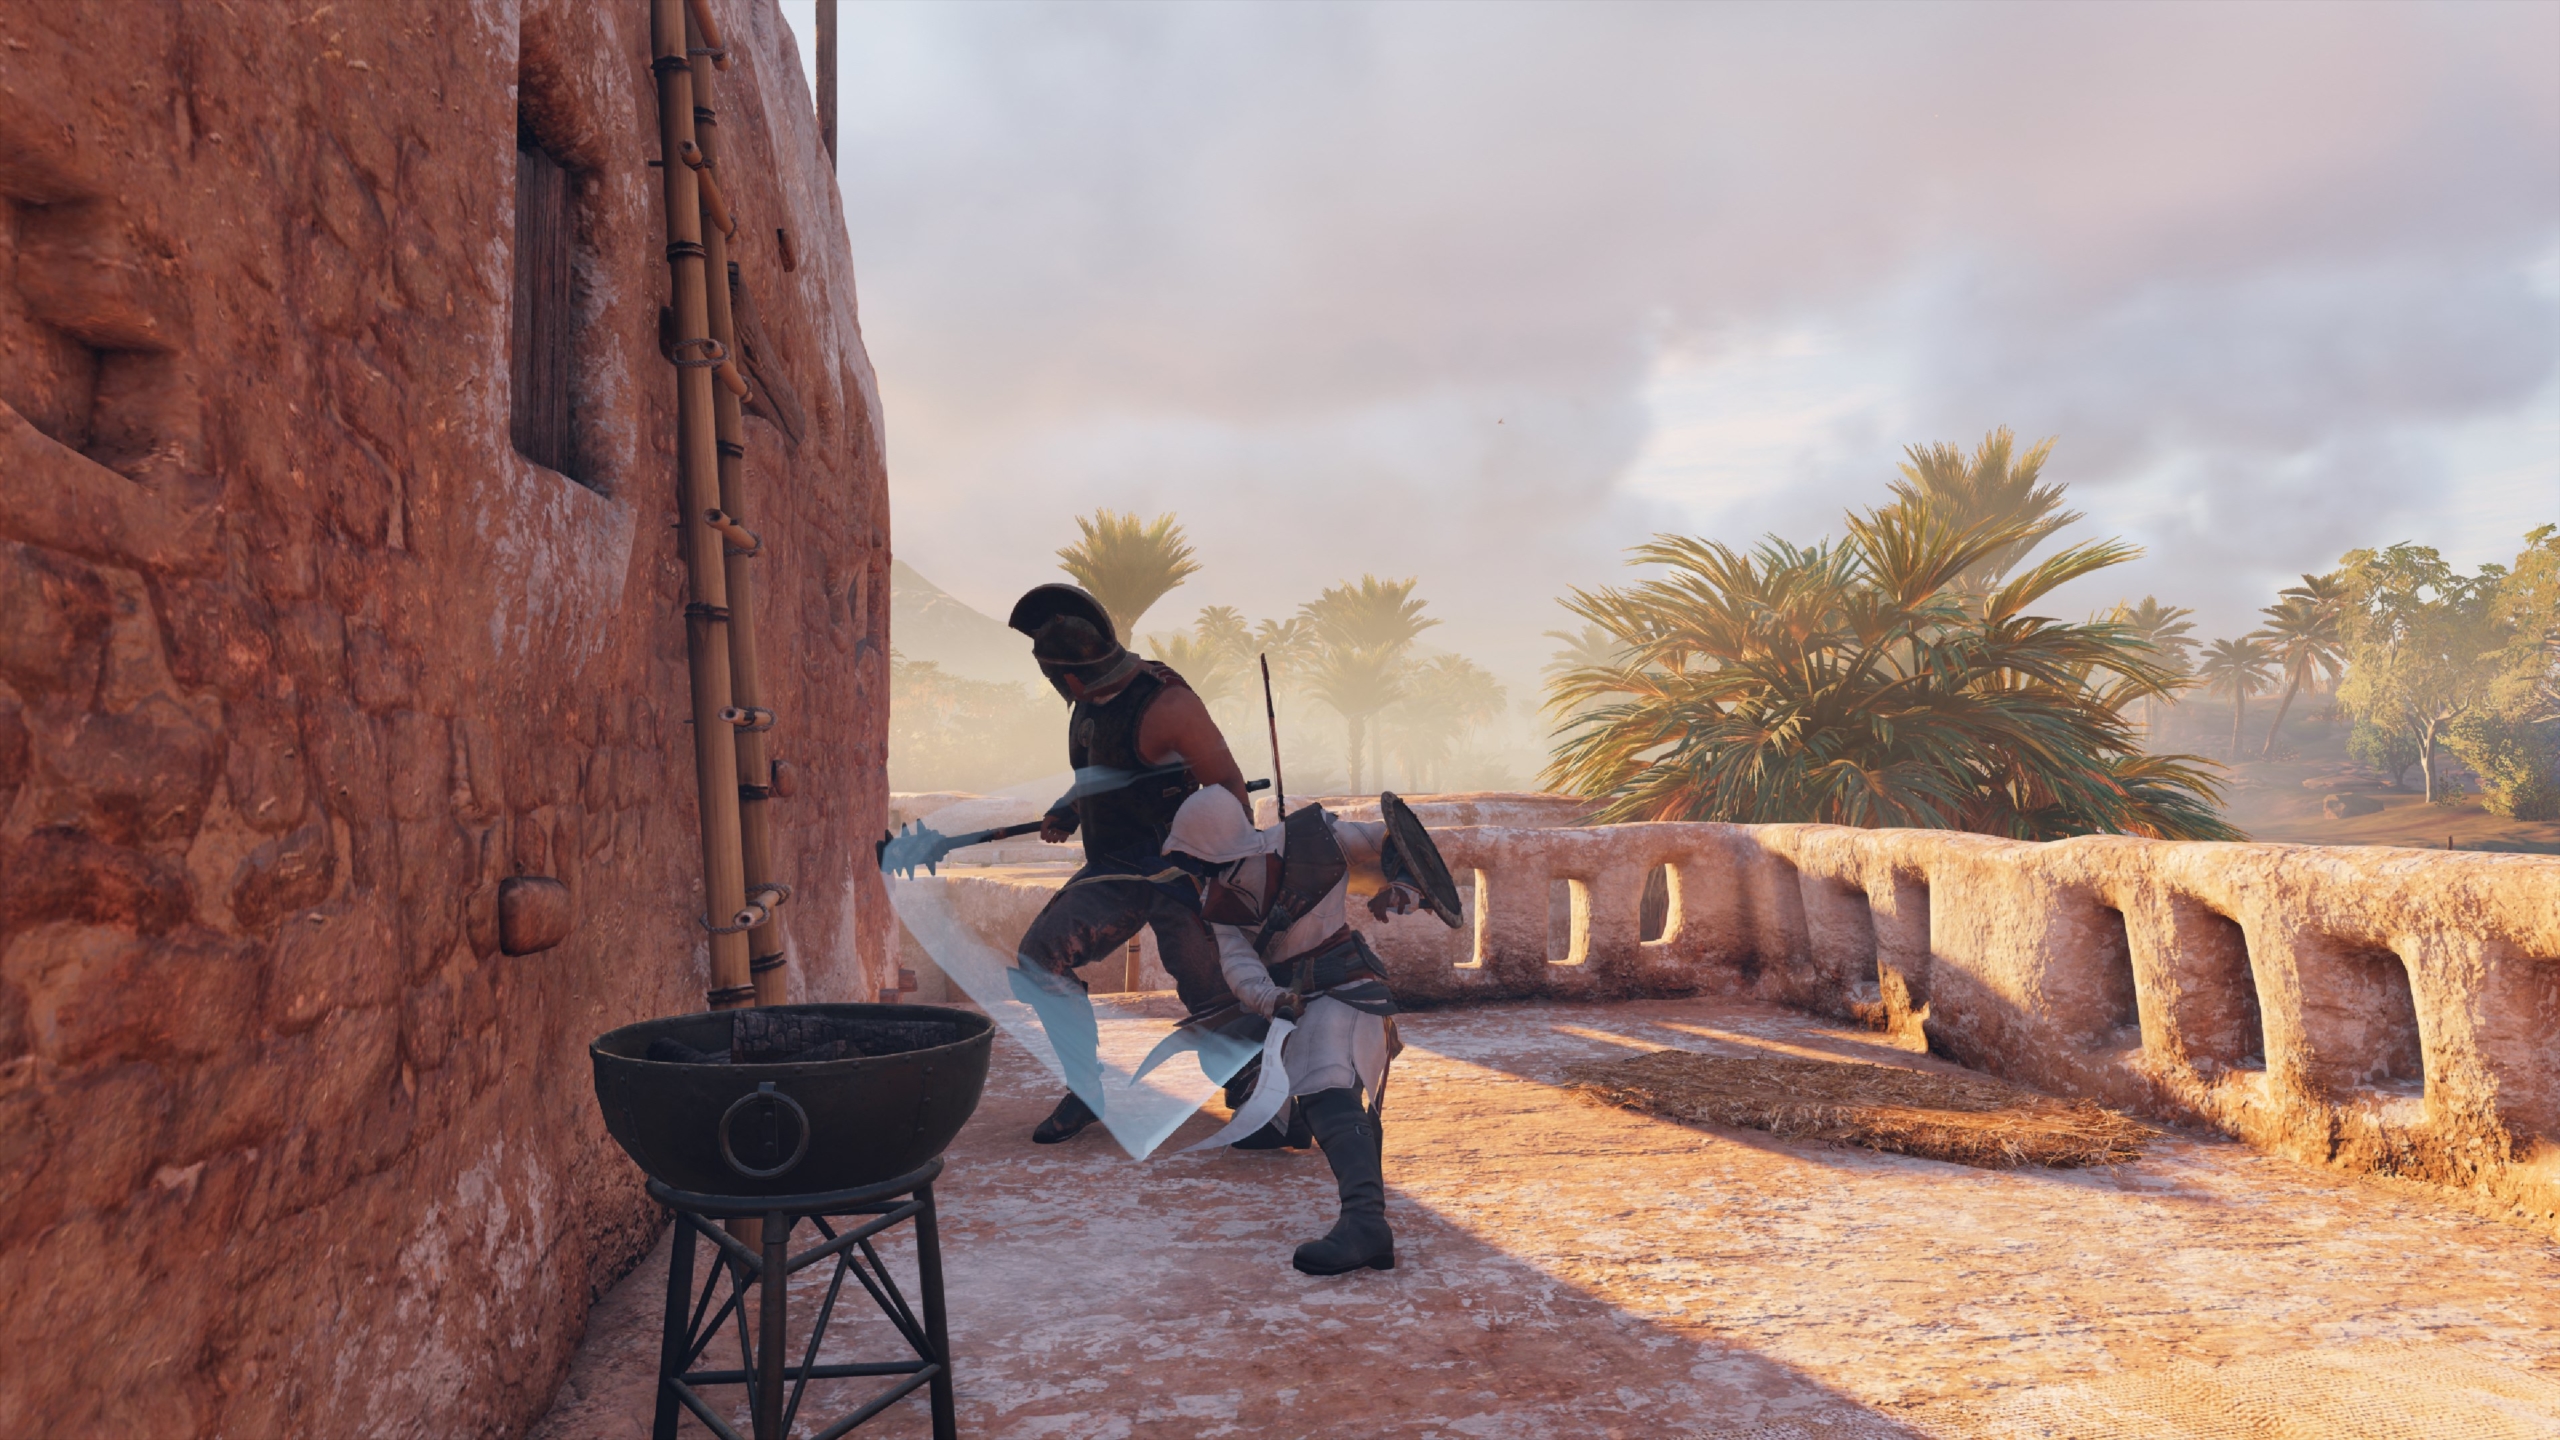 Trophies in Assassin's Creed Origins - Assassin's Creed Origins Guide